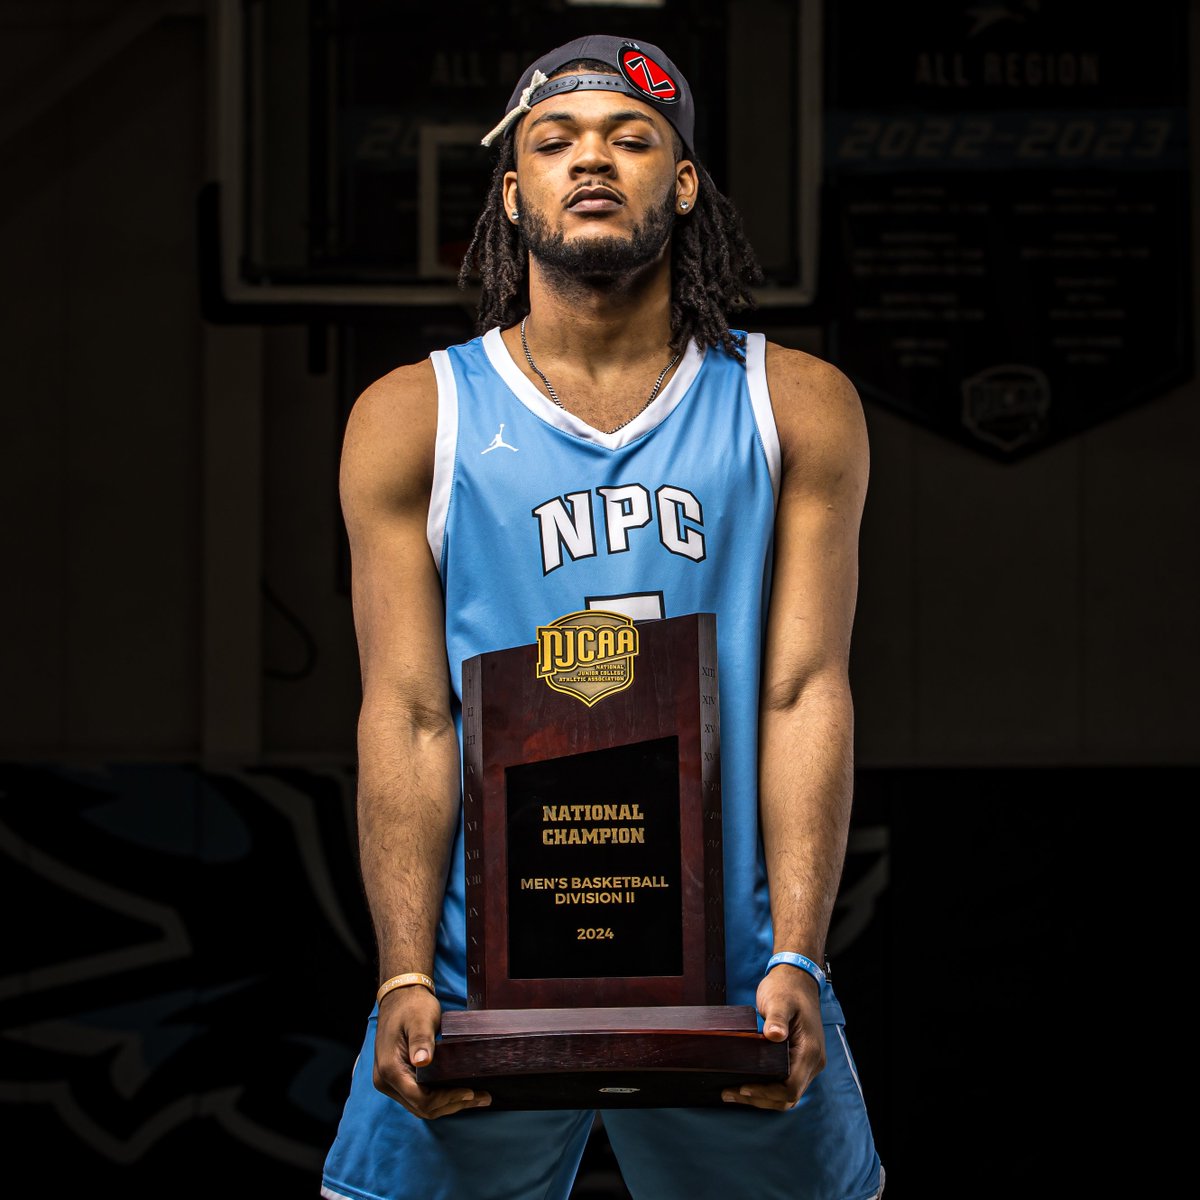 #NPCHawks sophomore forward Nakavieon White has been selected to the 2024 #NJCAA Men's Basketball All-Star Game May 18th in Las Vegas! Nakavieon will play for the North All-Stars, which will be led by NPC head coach Dillon Hargrove. Together, we win! #ThisIsNPC